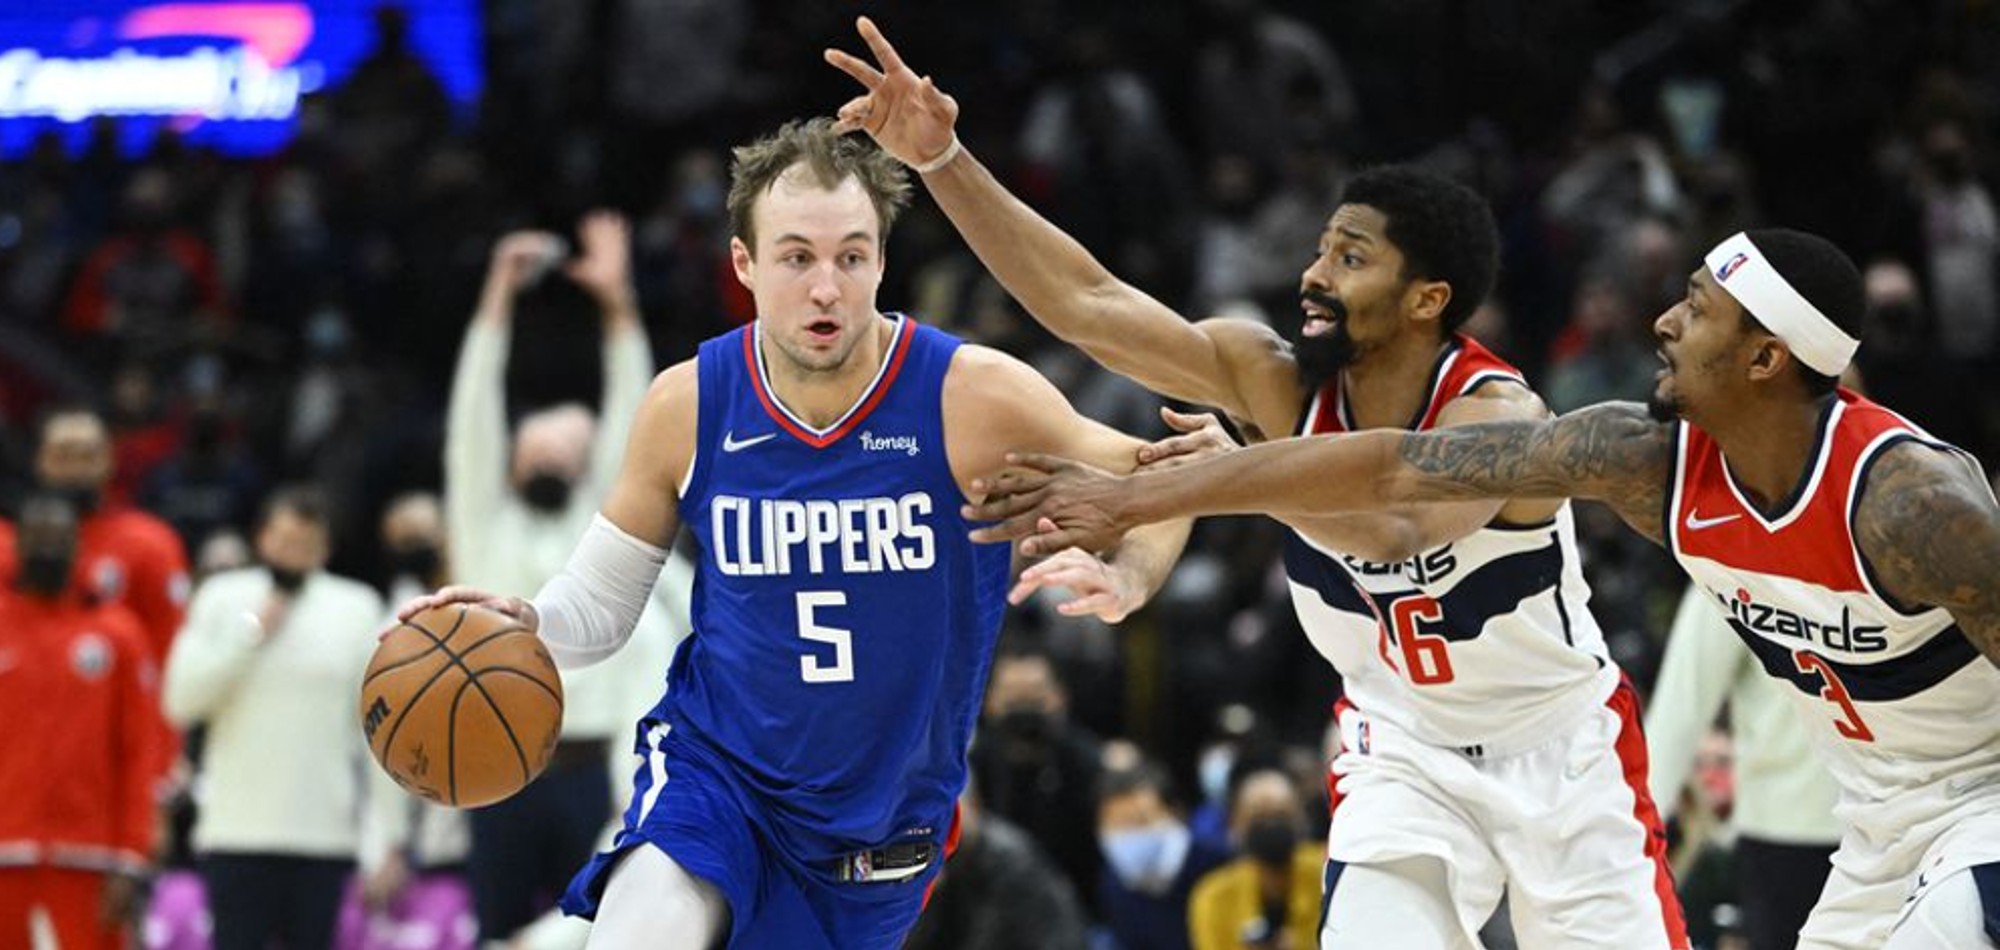 NBA roundup: Clippers